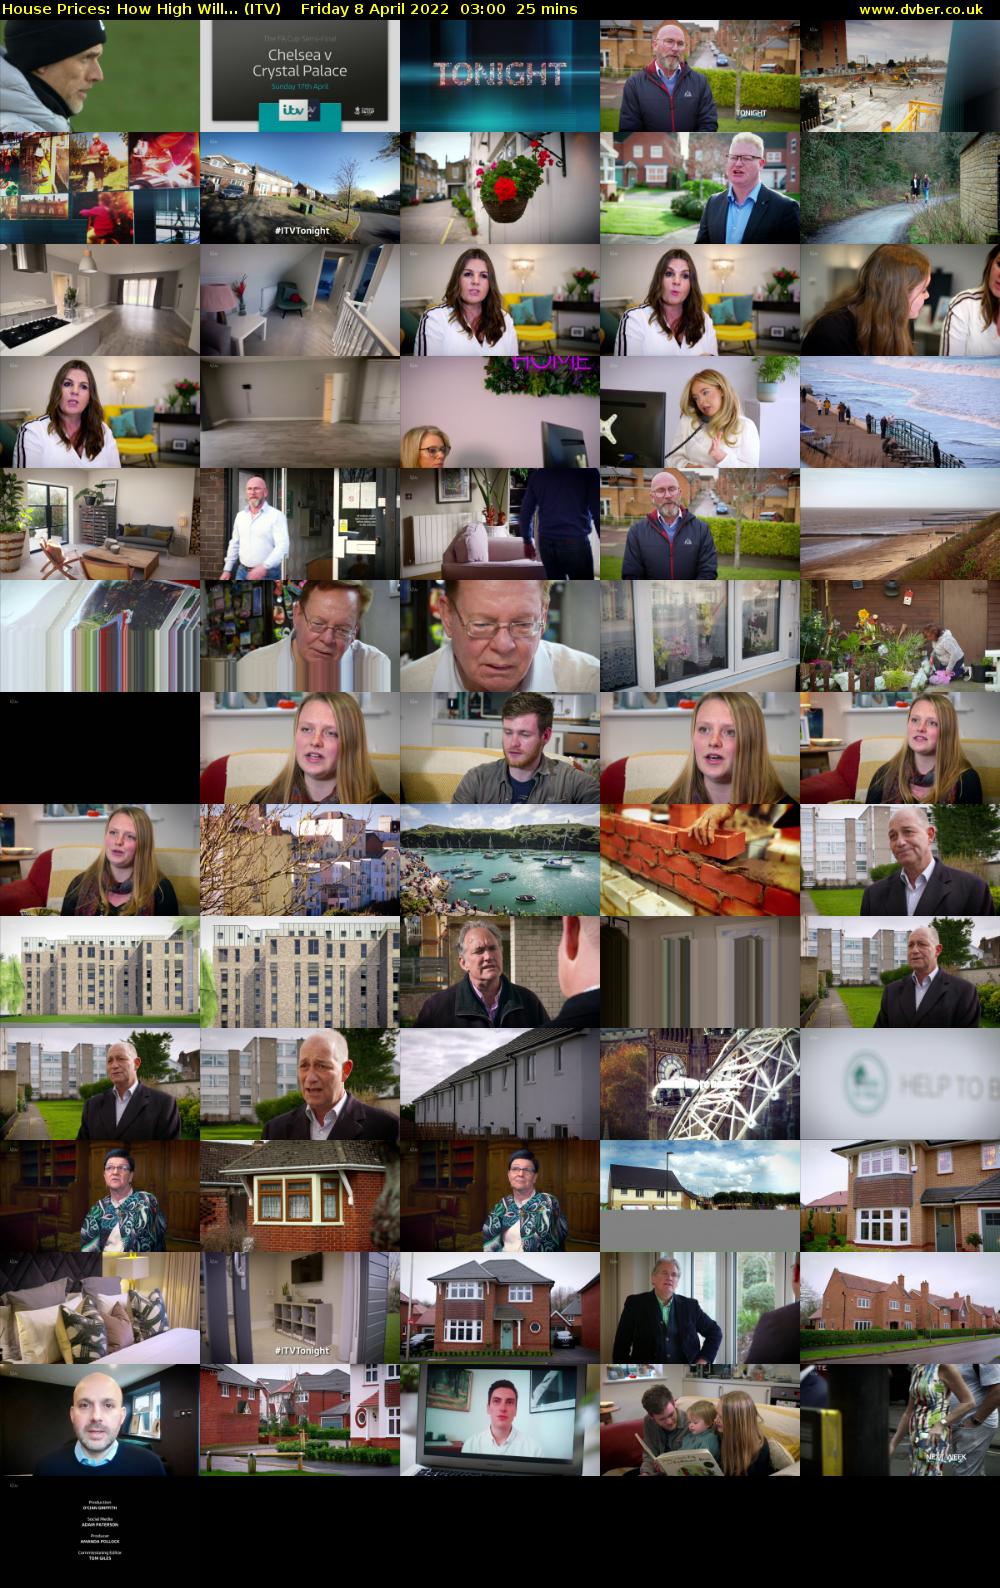 House Prices: How High Will... (ITV) Friday 8 April 2022 03:00 - 03:25